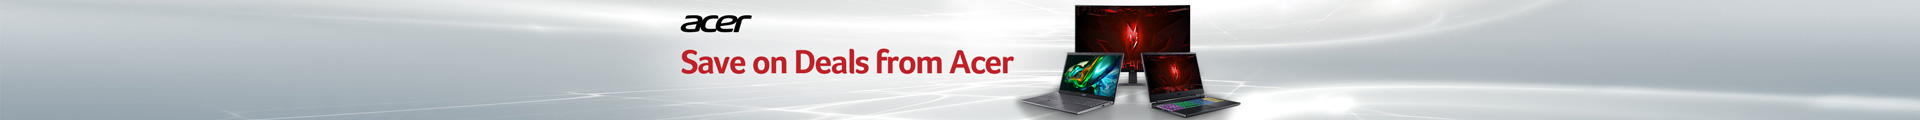 Save on deals from Acer